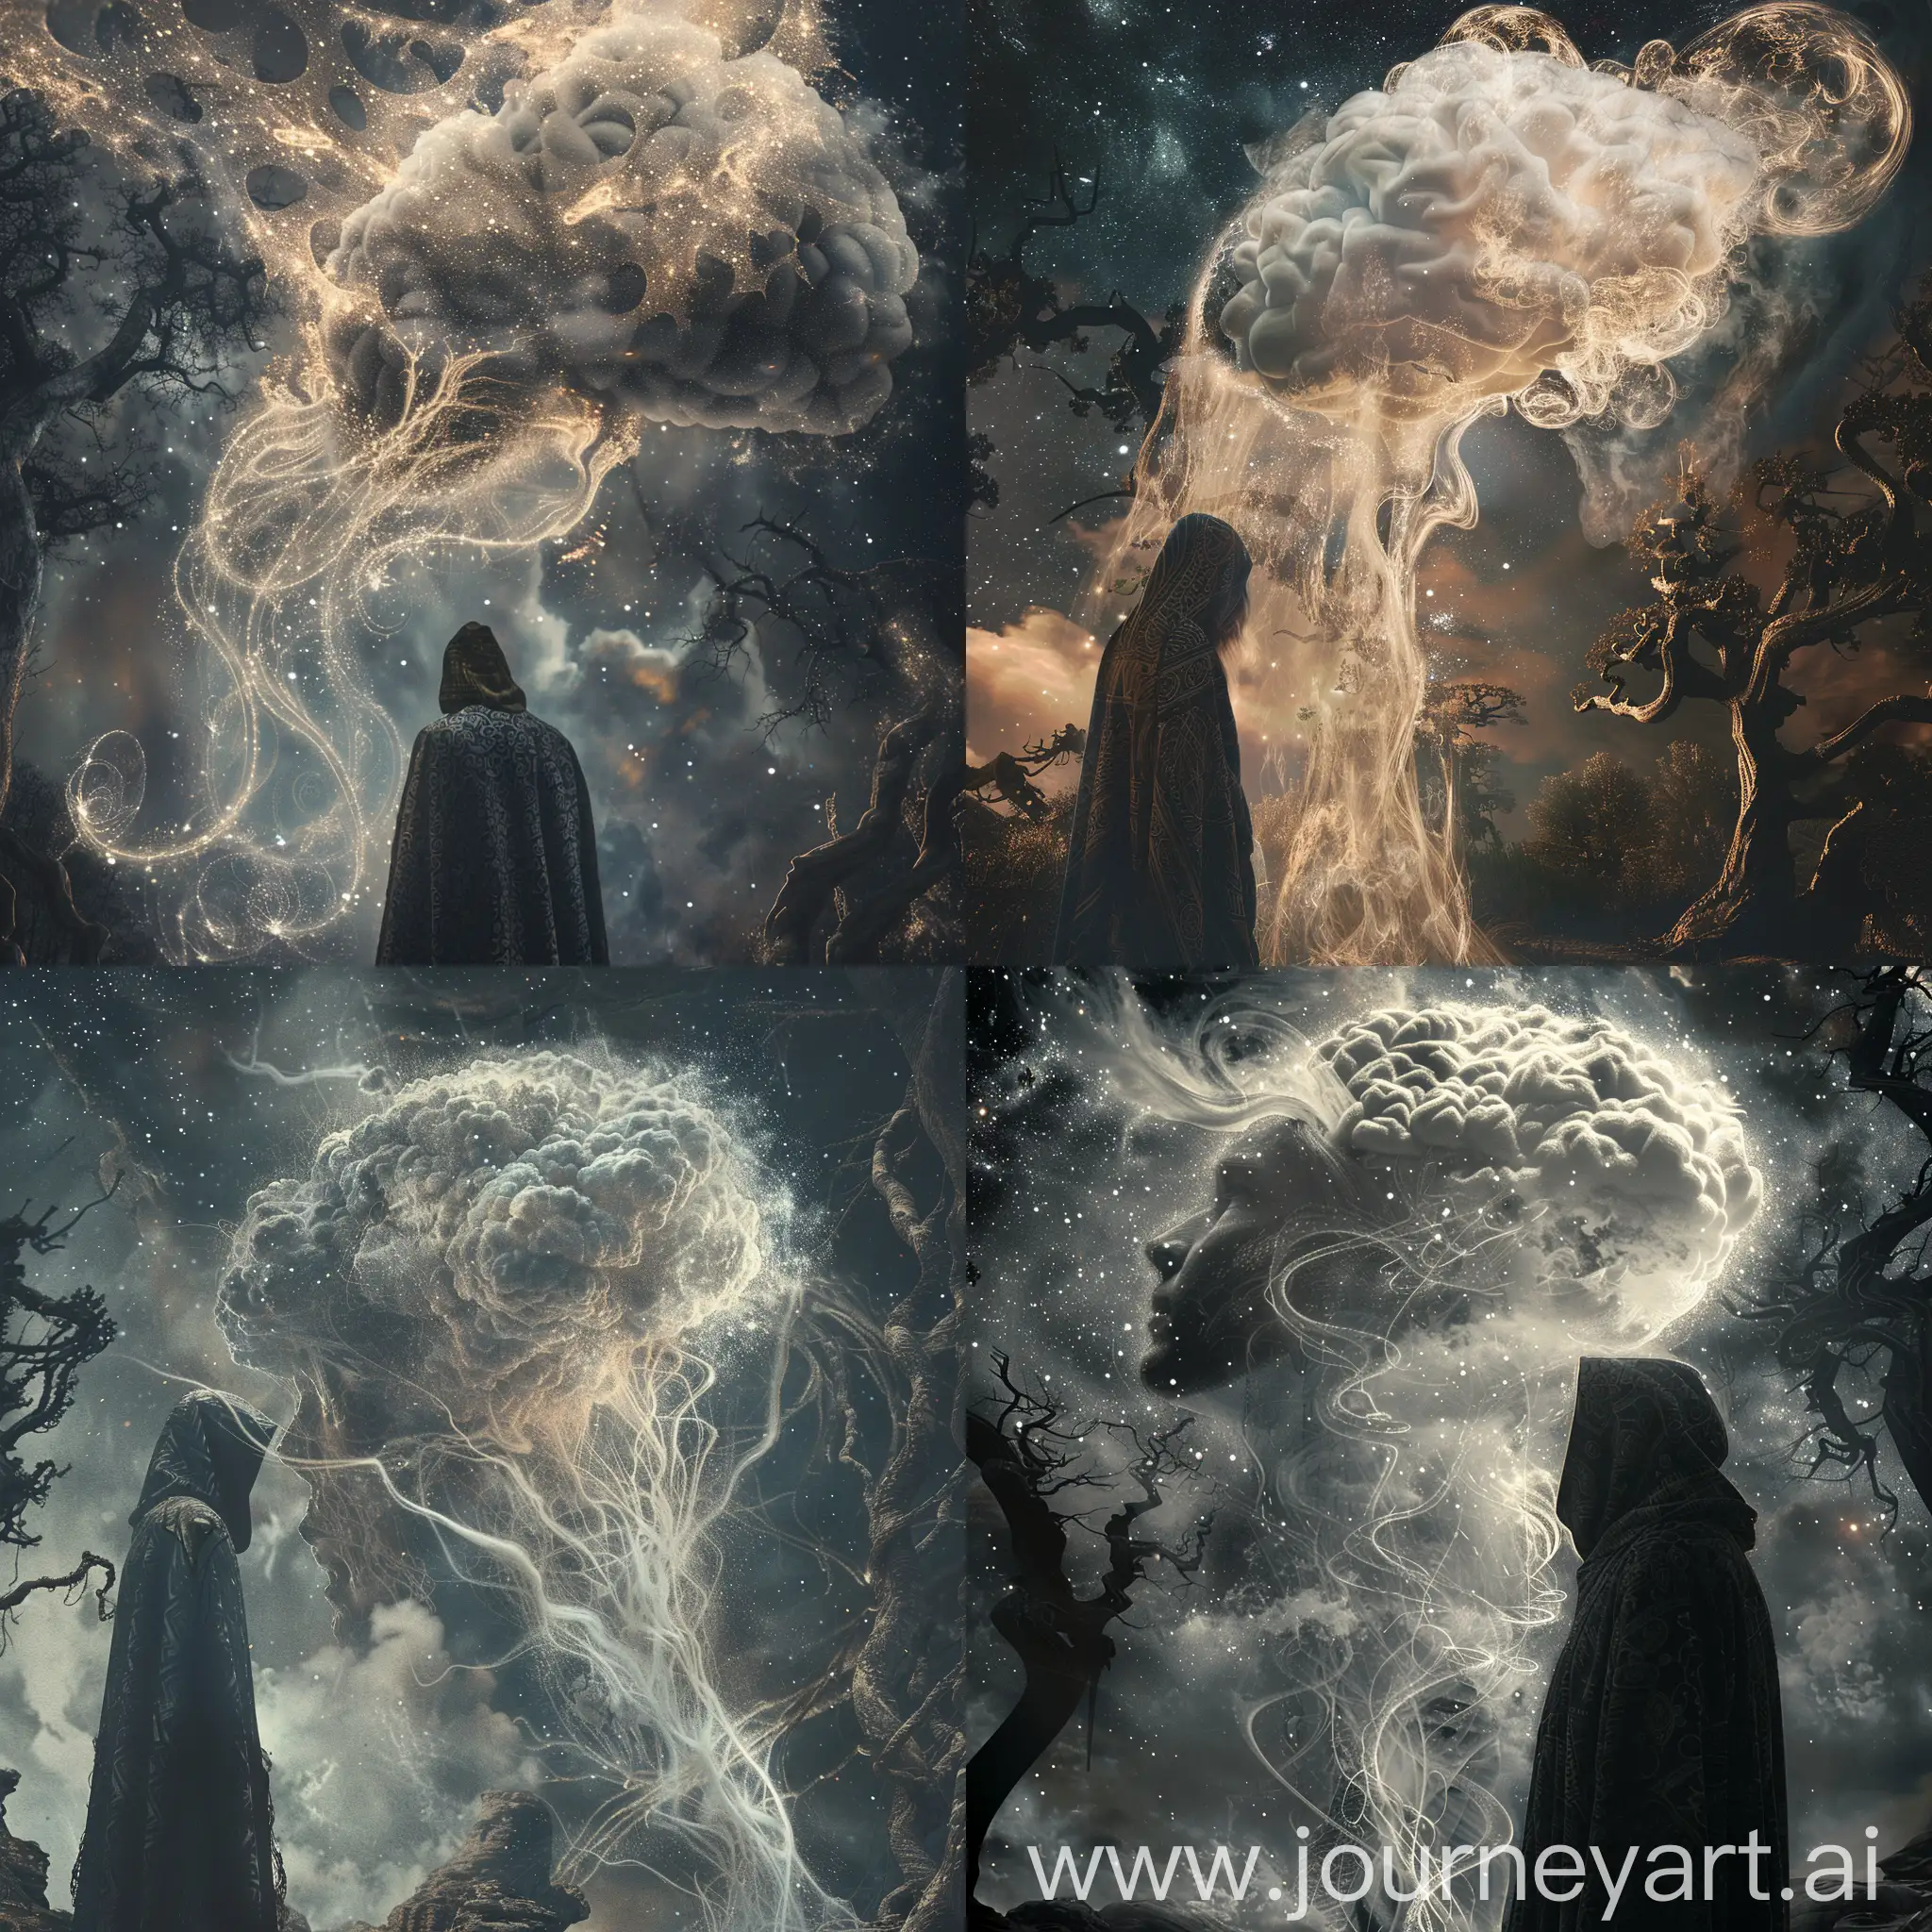 A stunning double exposure image featuring a hyperrealistic humanoid cloud, with tendril-like features extending towards a hooded man standing with his back turned. The cloud's ethereal form is a blend of mist, light, and shadow, creating a mystical and surreal atmosphere. The man appears to be a wizard or sorcerer, dressed in a dark and detailed robe with intricate patterns. The background is a blend of dark, starry skies and ancient, twisted trees, adding to the dark fantasy theme of the image. The overall composition is professionally rendered with incredible detail and depth., dark fantasy, 3d render, illustration, photo